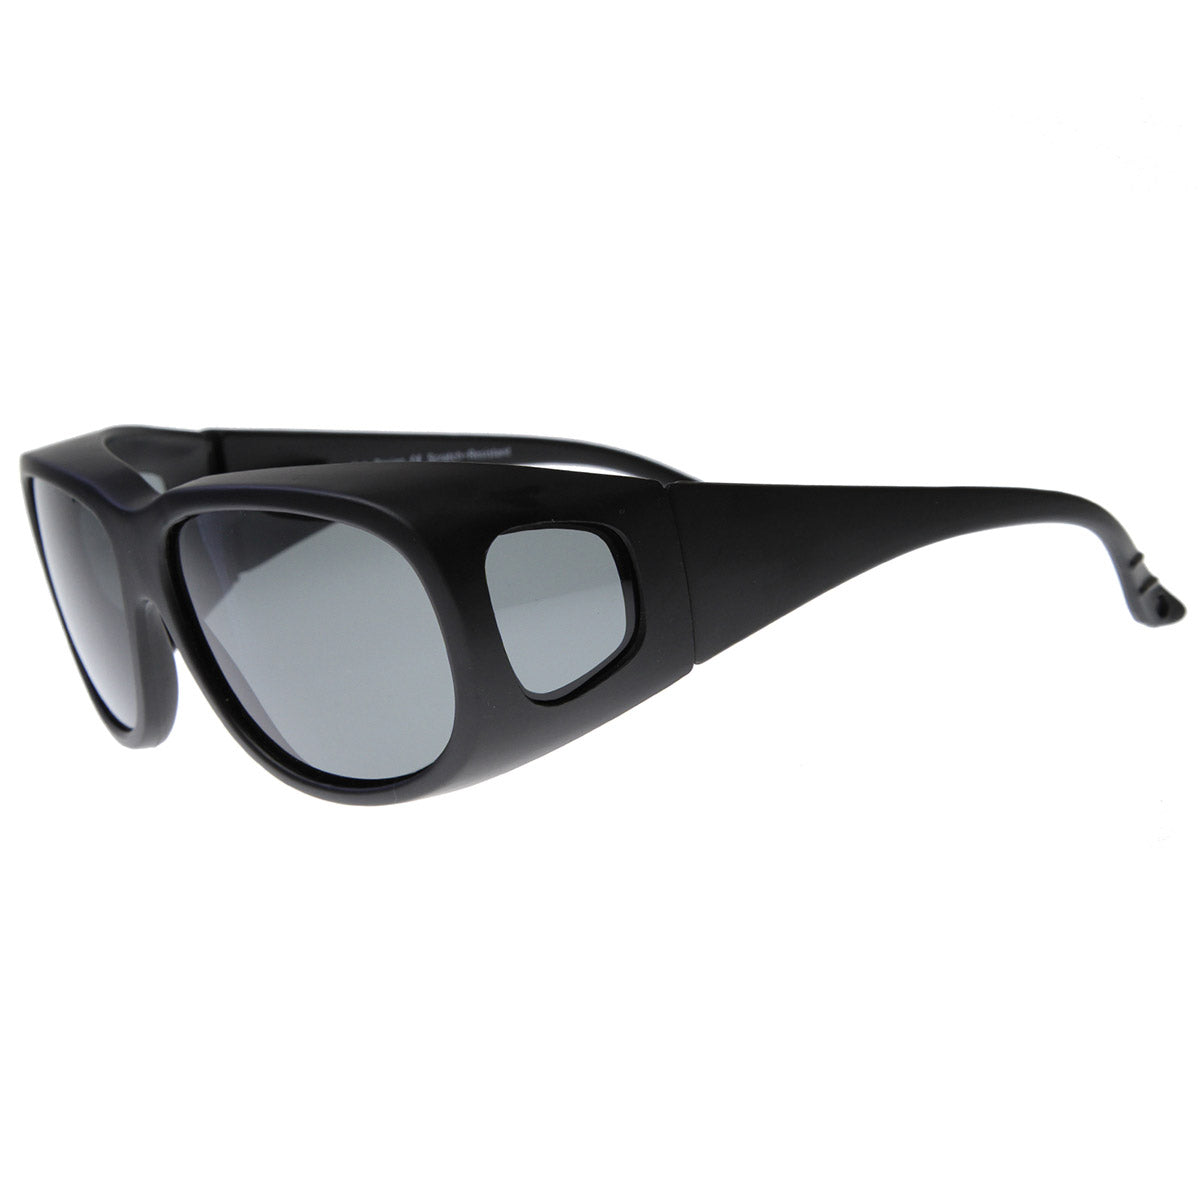 Clash Mask Silver Sunglasses Unisex Z2310E Fashion Trend In Black And White  Square Frame With Anti UV Lens For Outdoor Activities From Haleyr, $43.11